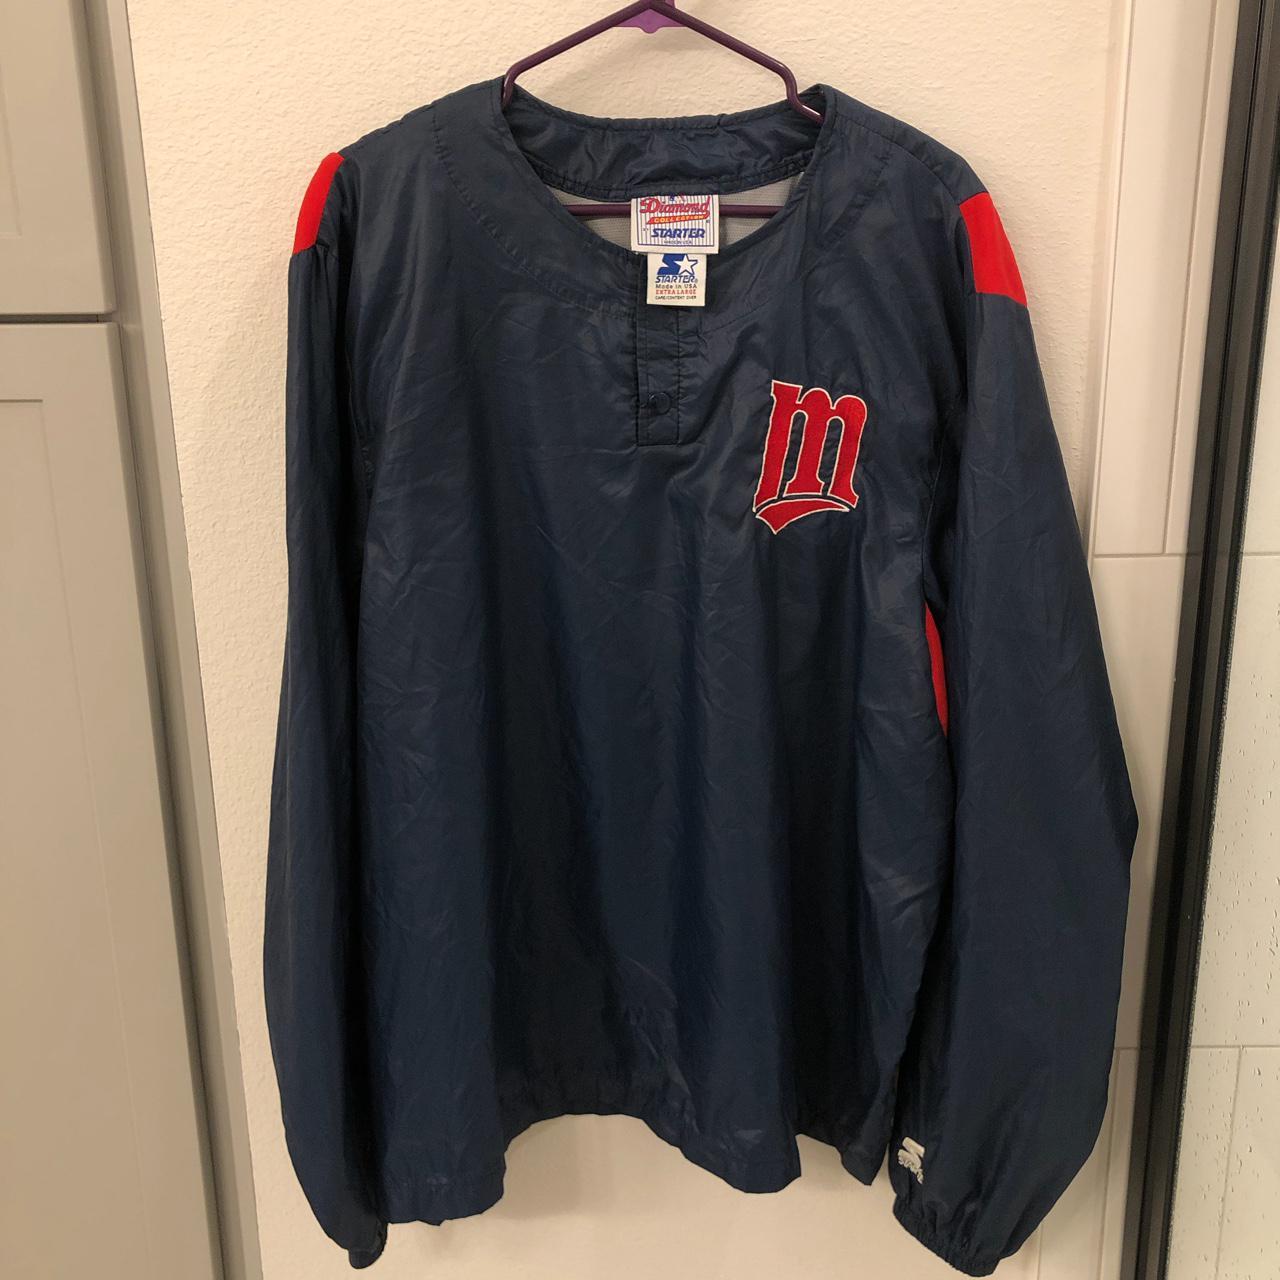 Vintage Minnesota Twins jersey + Made in the USA - Depop